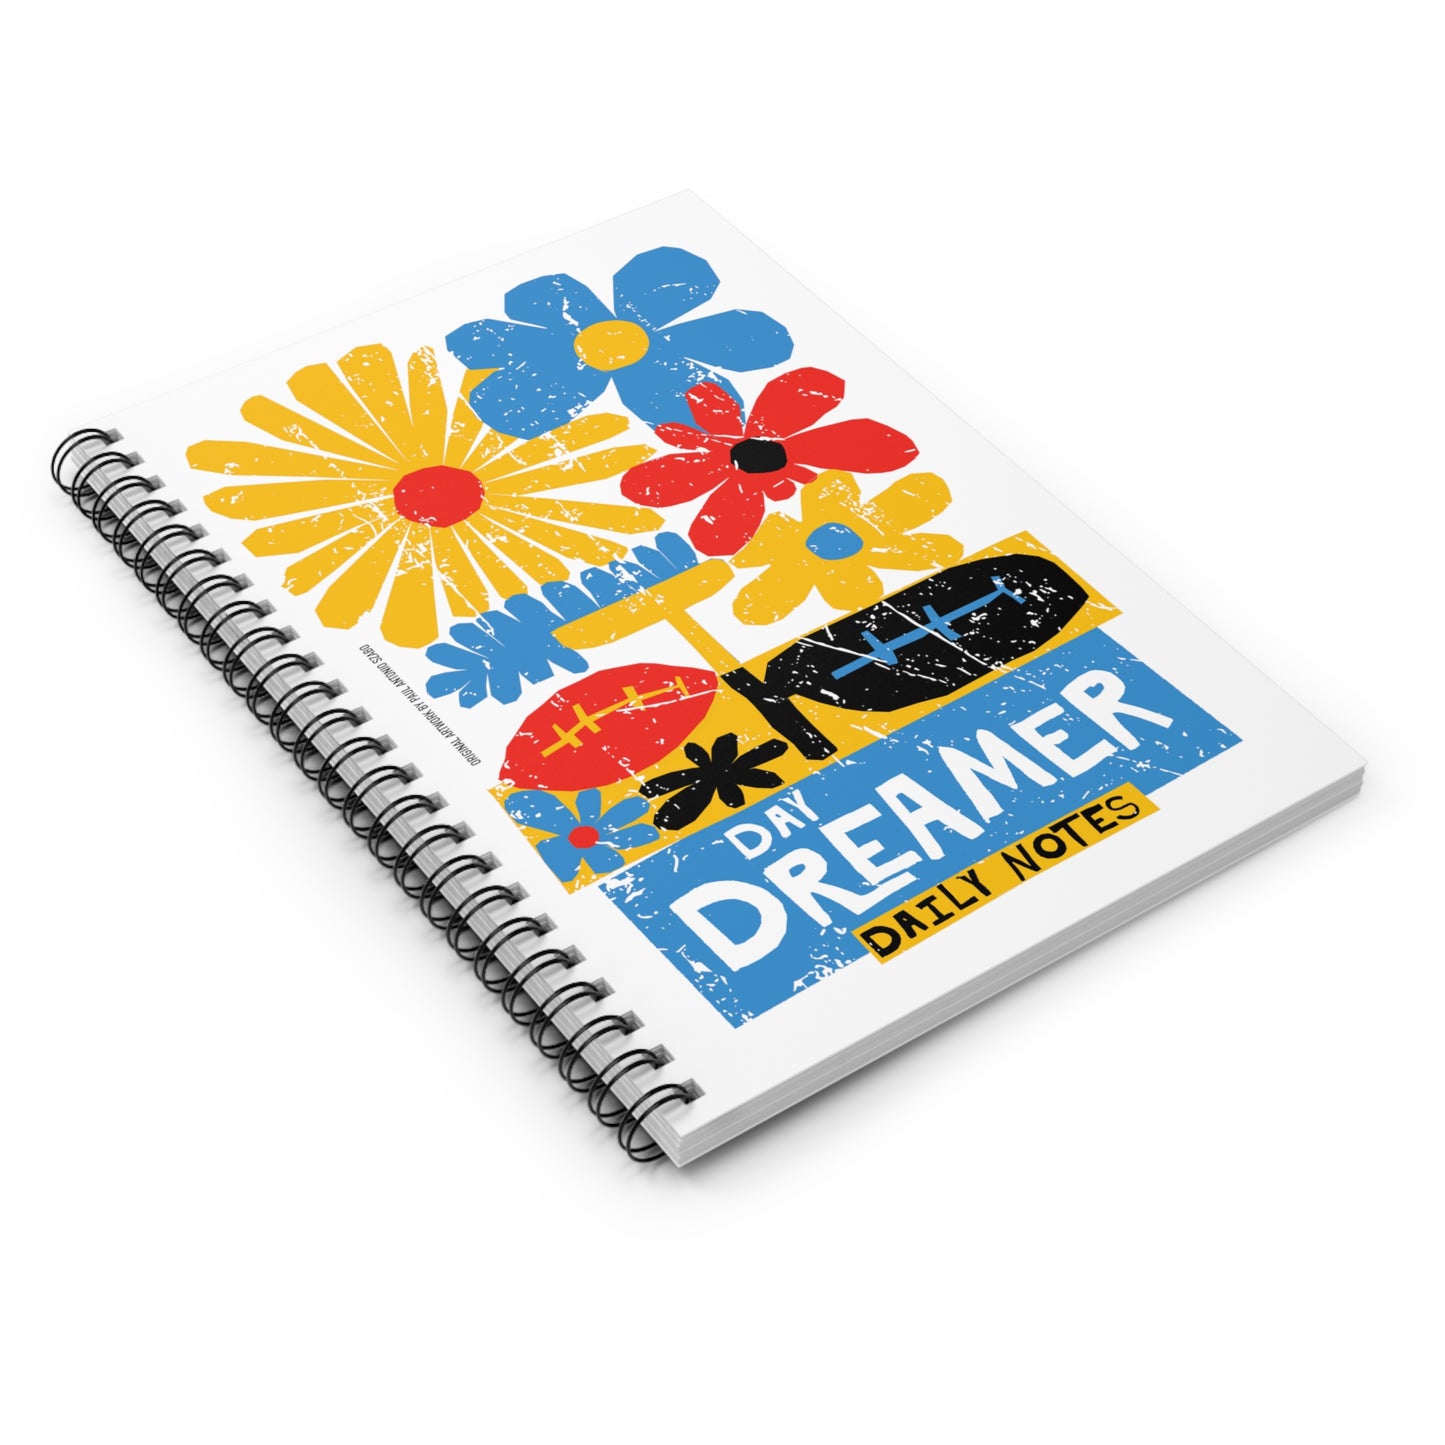 Day Dreamer. Daily Notes, Spiral Handwriting Note Book by United Day Dreamers